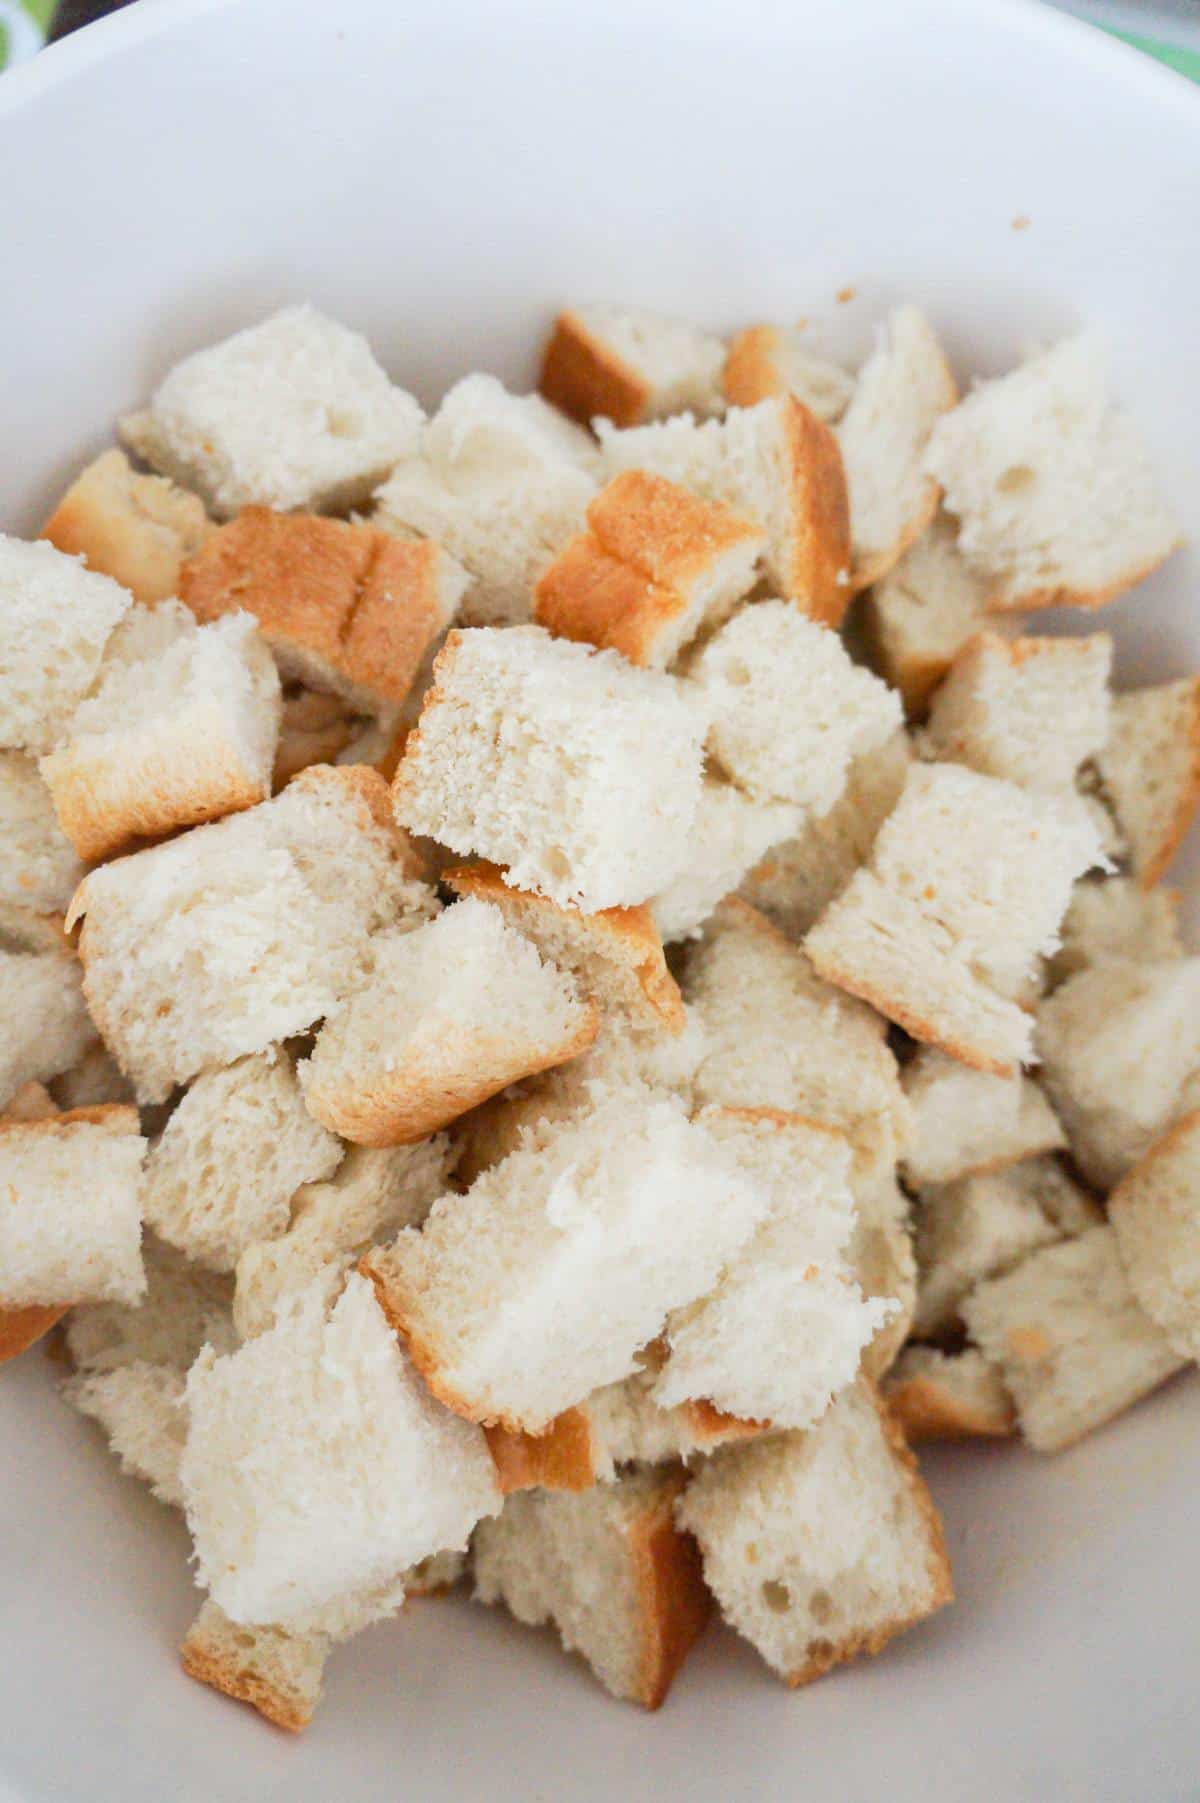 cubed bread in a mixing bowl